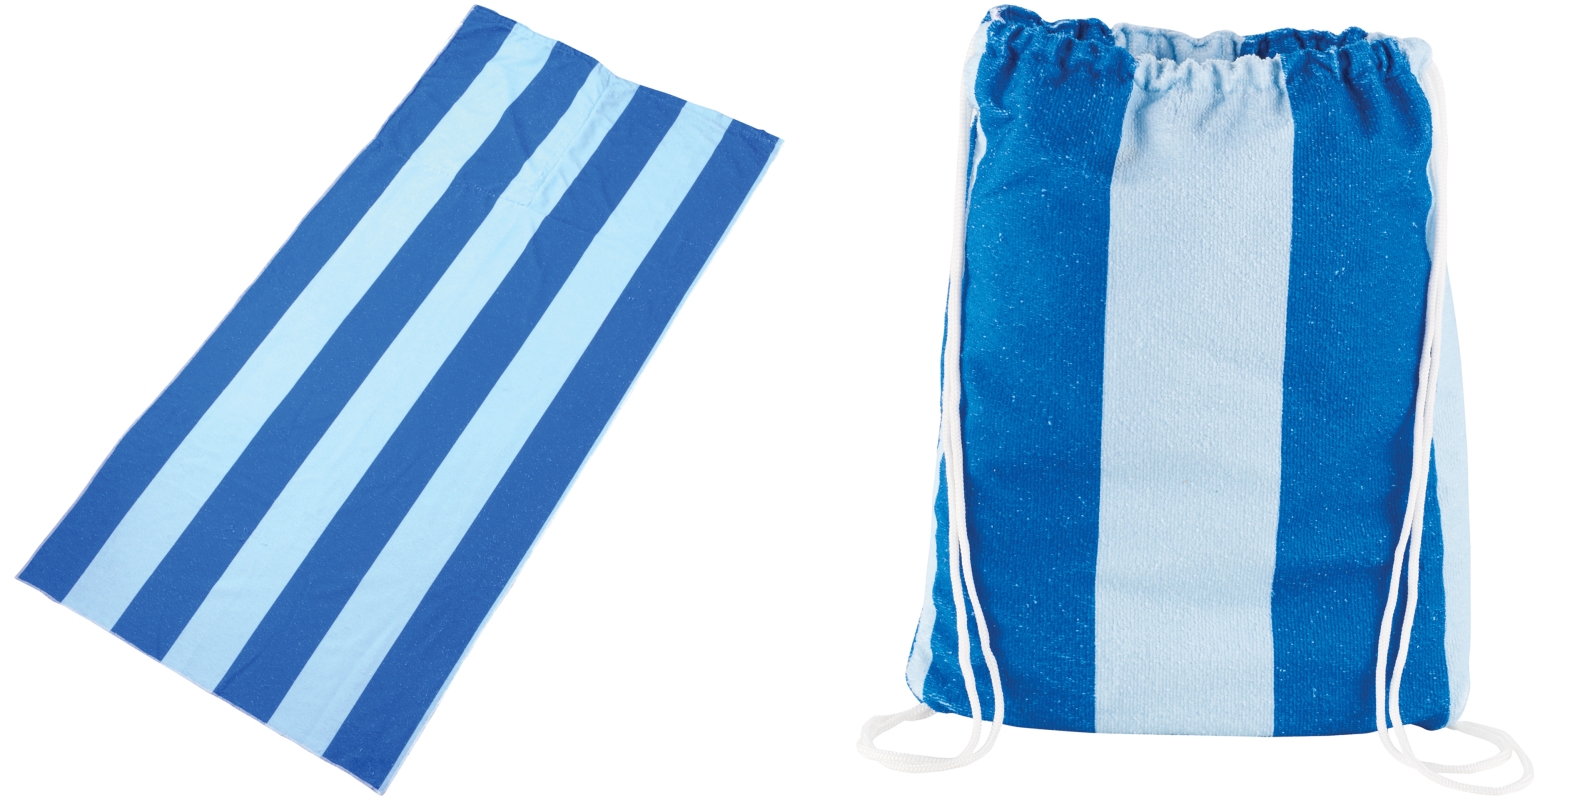 LEEDS 1080-27 - Microfiber Beach Blanket with Drawstring Pouch